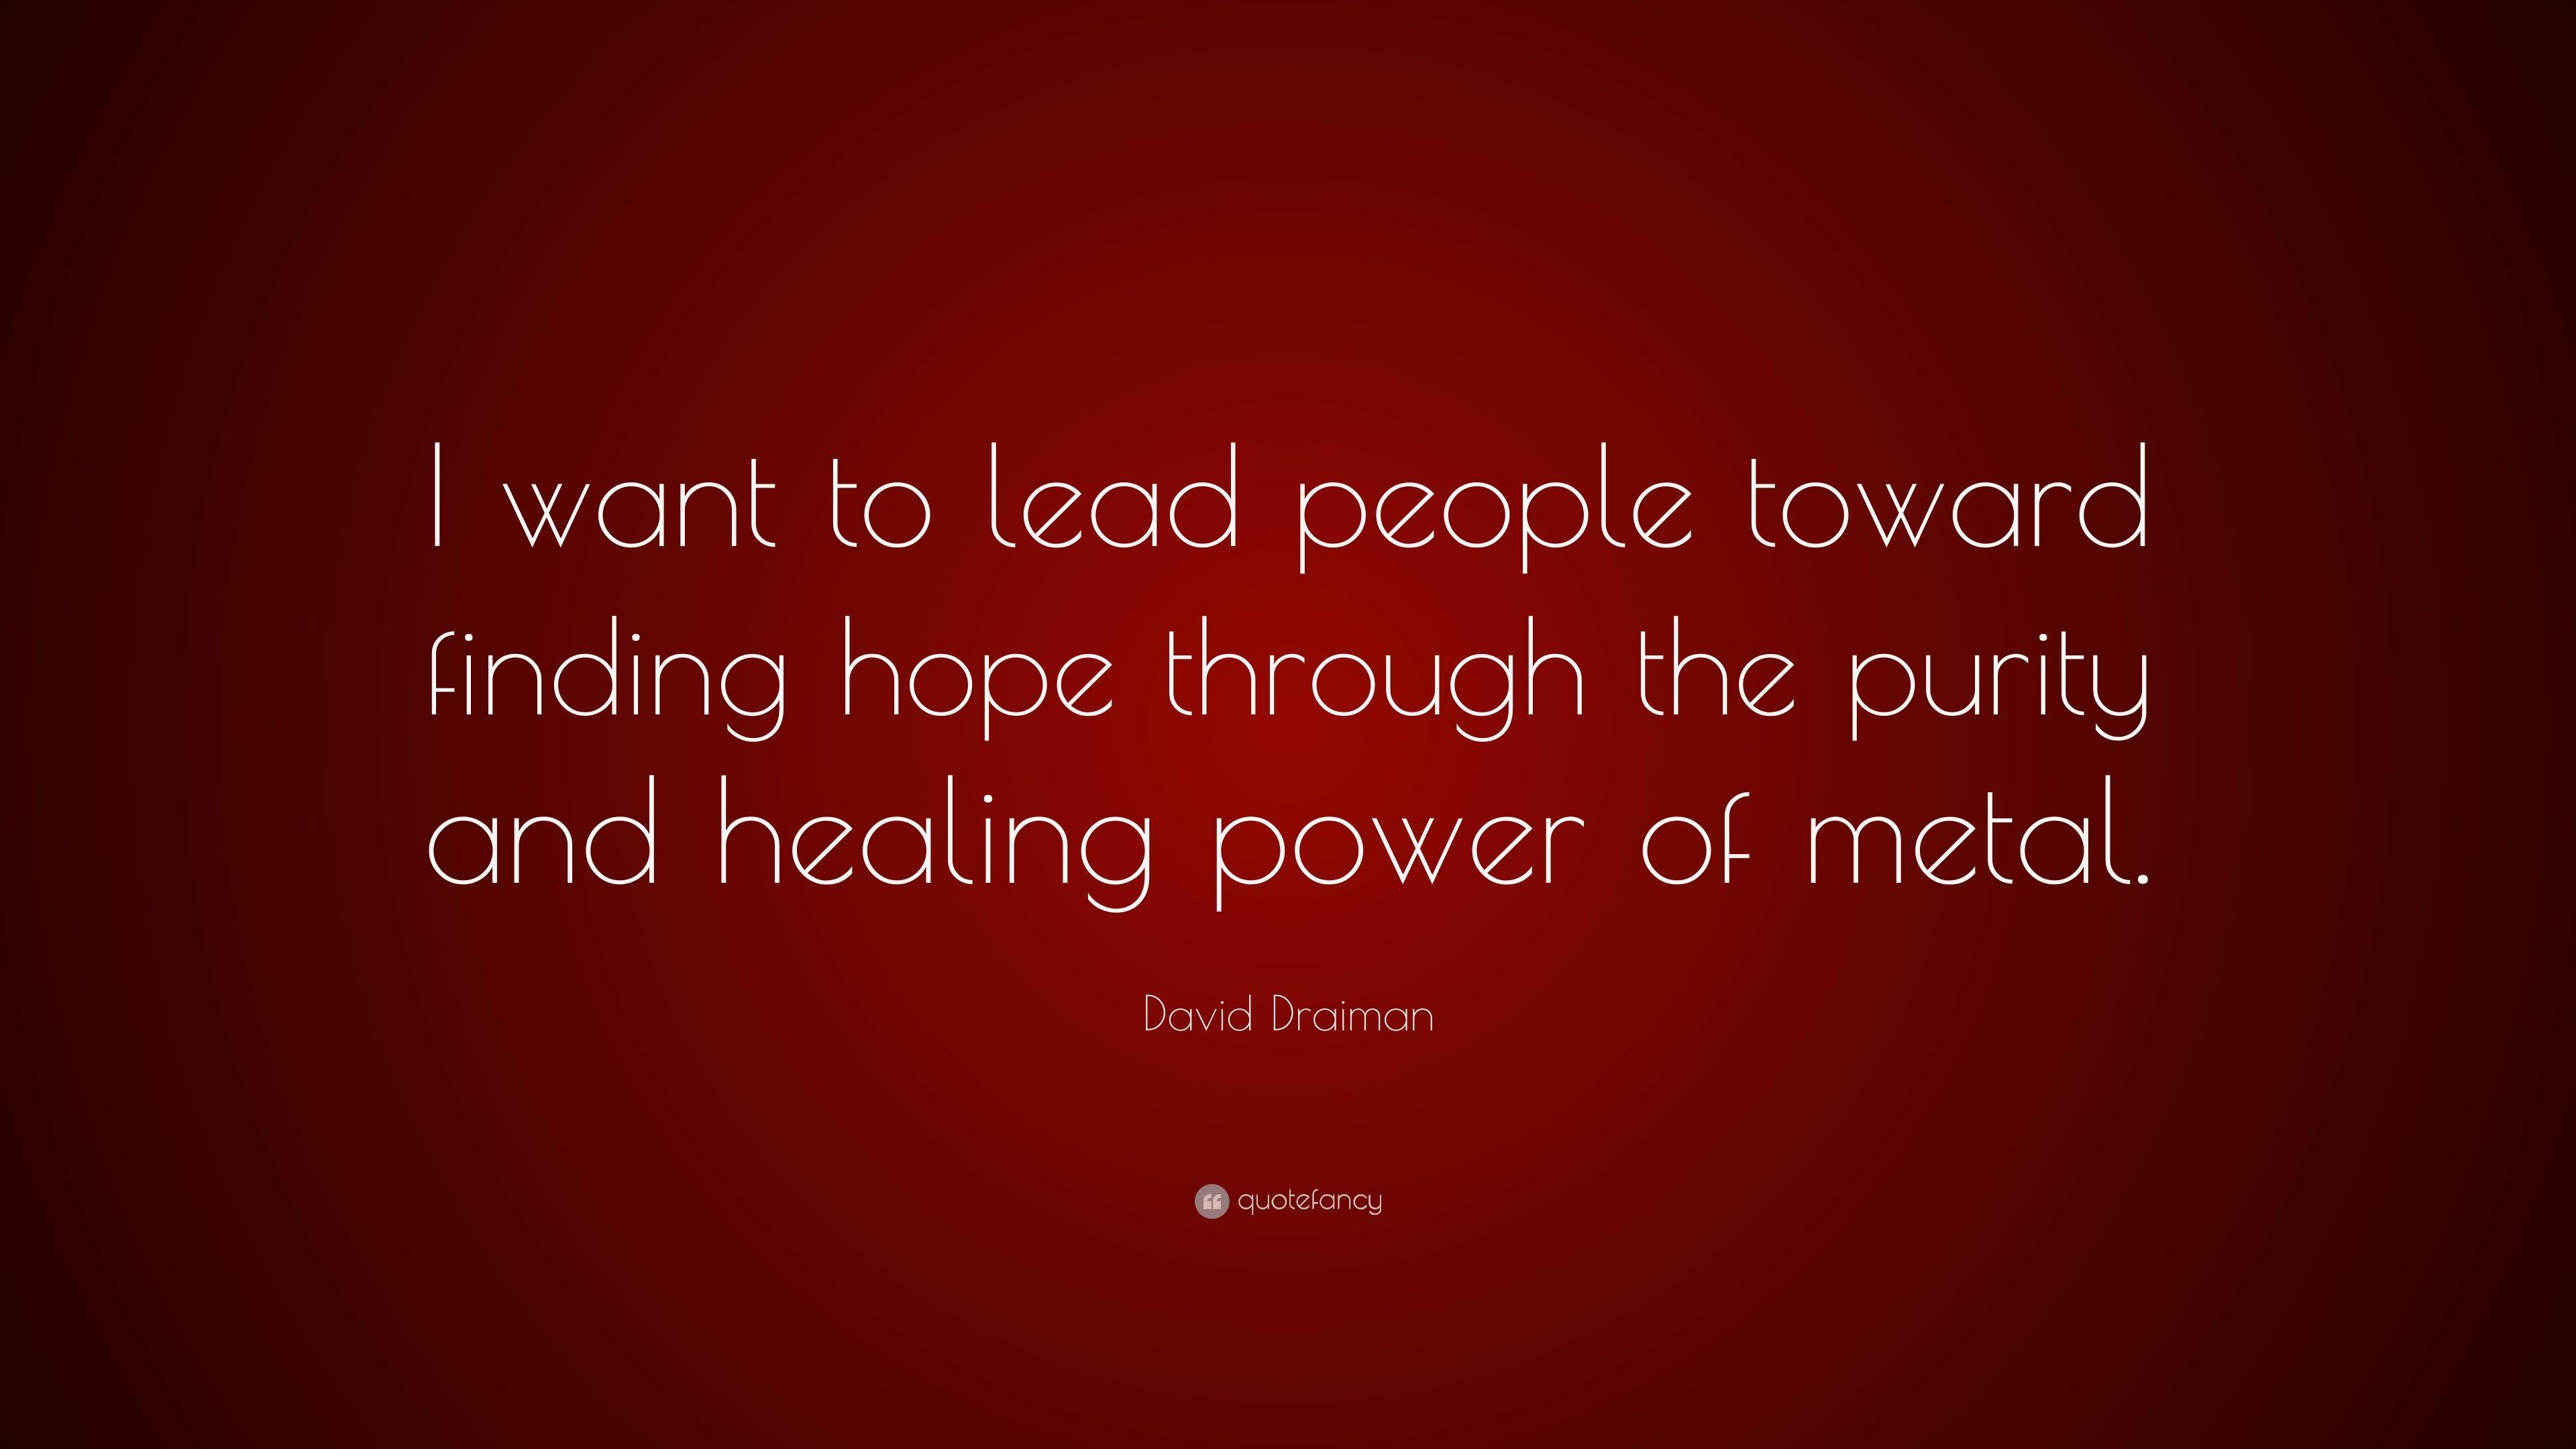 David Draiman Quote: “I want to lead people toward finding hope